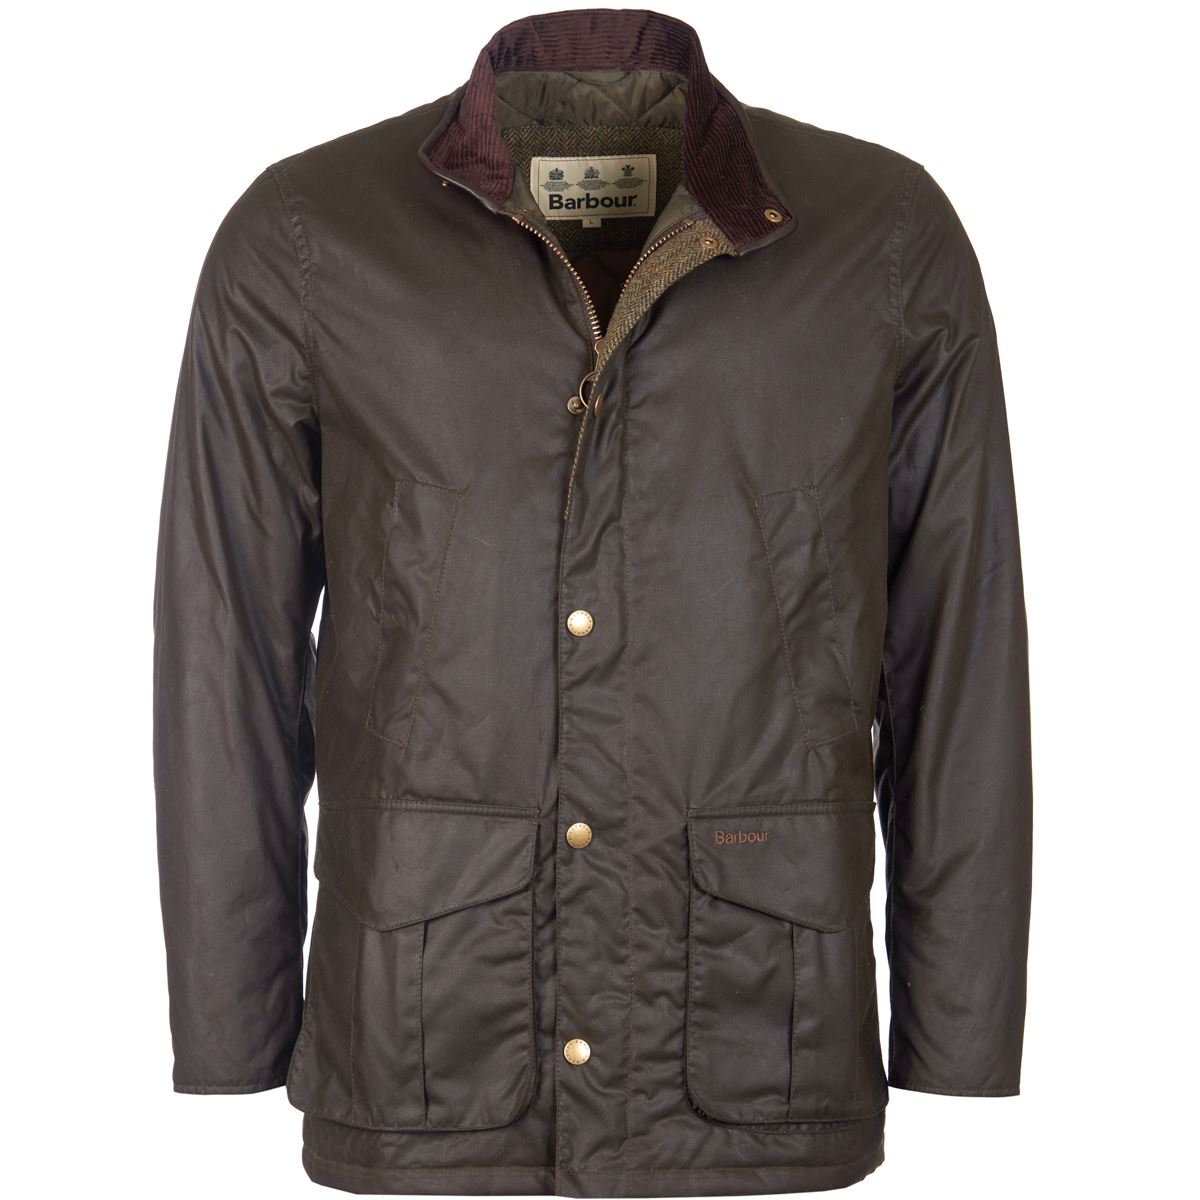 Are Barbour jackets worth the money?